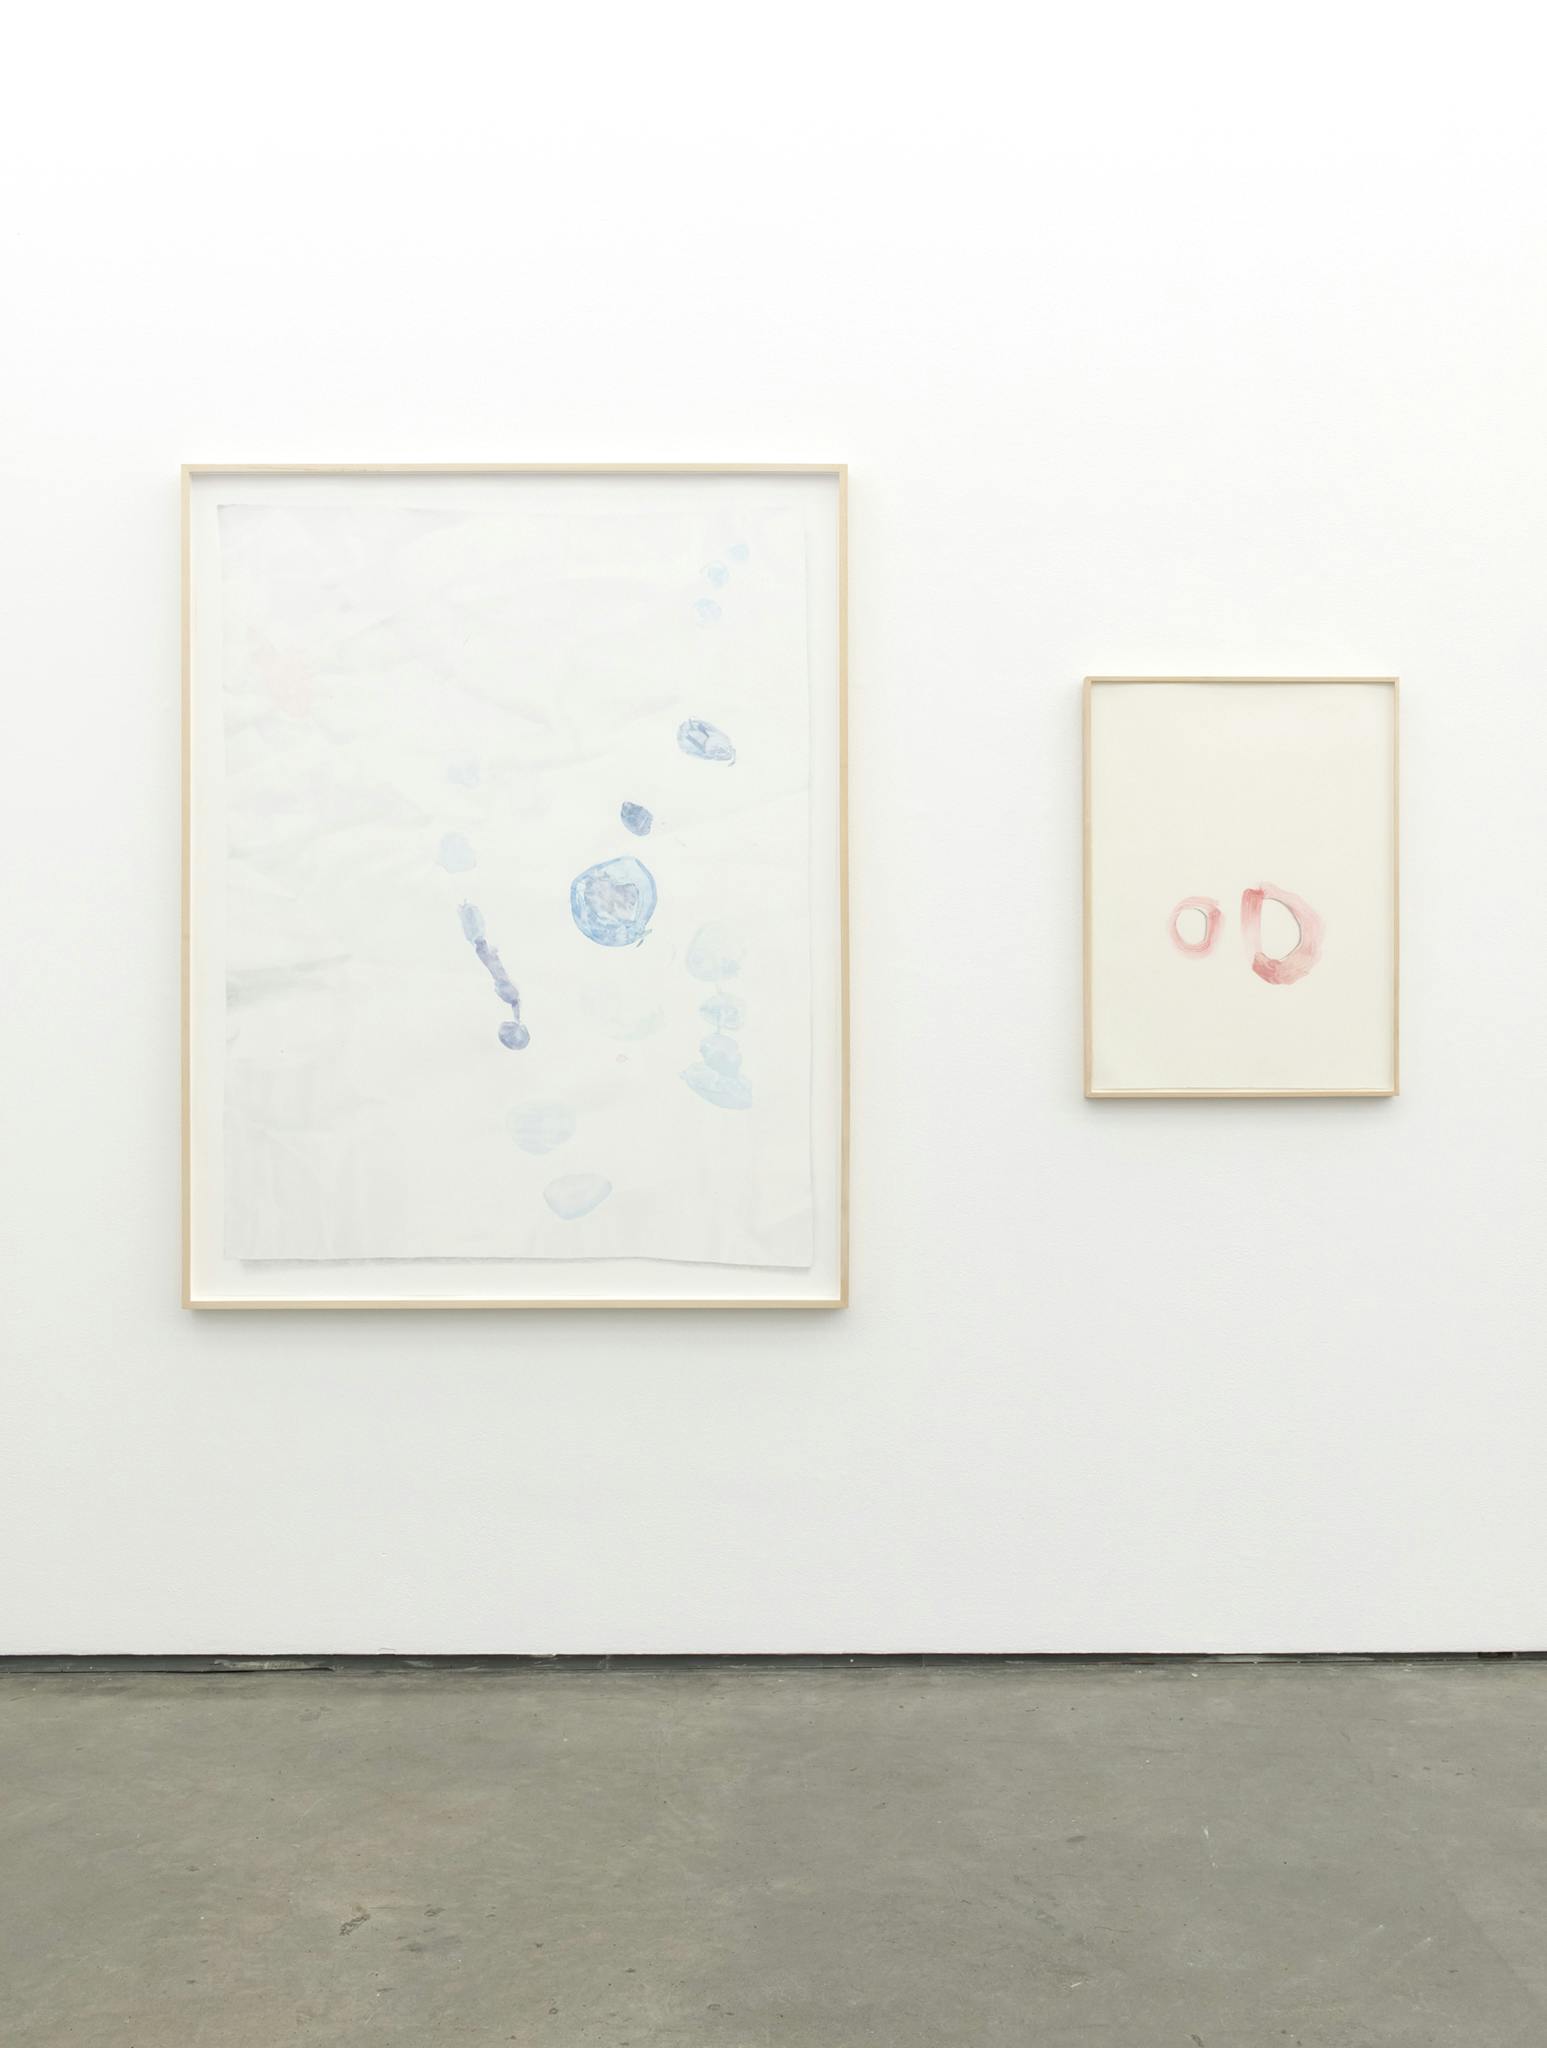 Two framed drawings on paper hanging on a gallery wall. The one to the right side is larger with blue markings, and the one on the right side is smaller with pink markings.